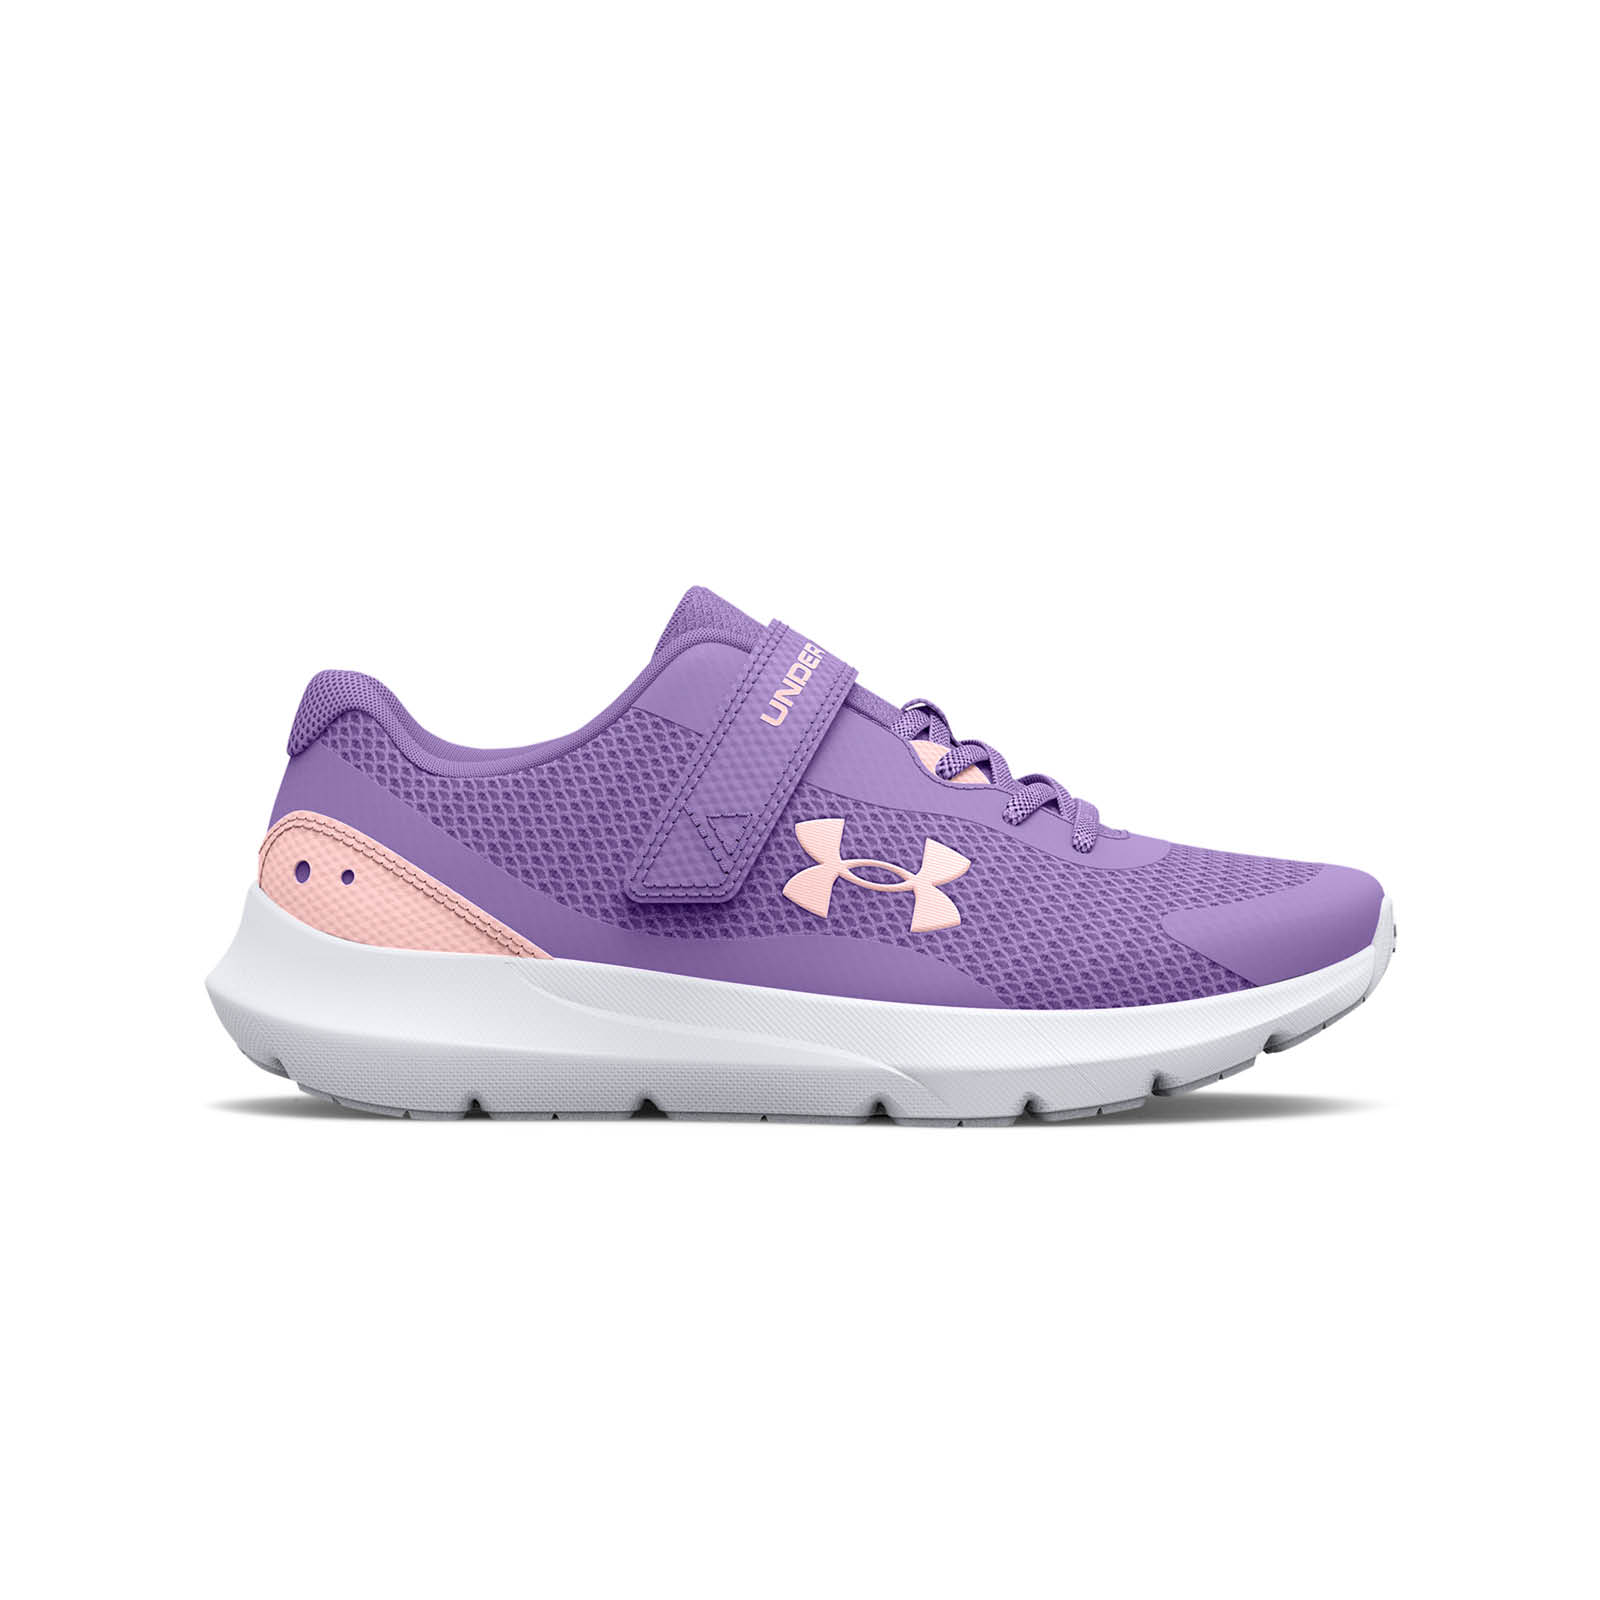 Under Armour - 3025014GPS SURGE 3 AC - 500/L247 Παιδικά > Παπούτσια > Αθλητικά > Παπούτσι Low Cut